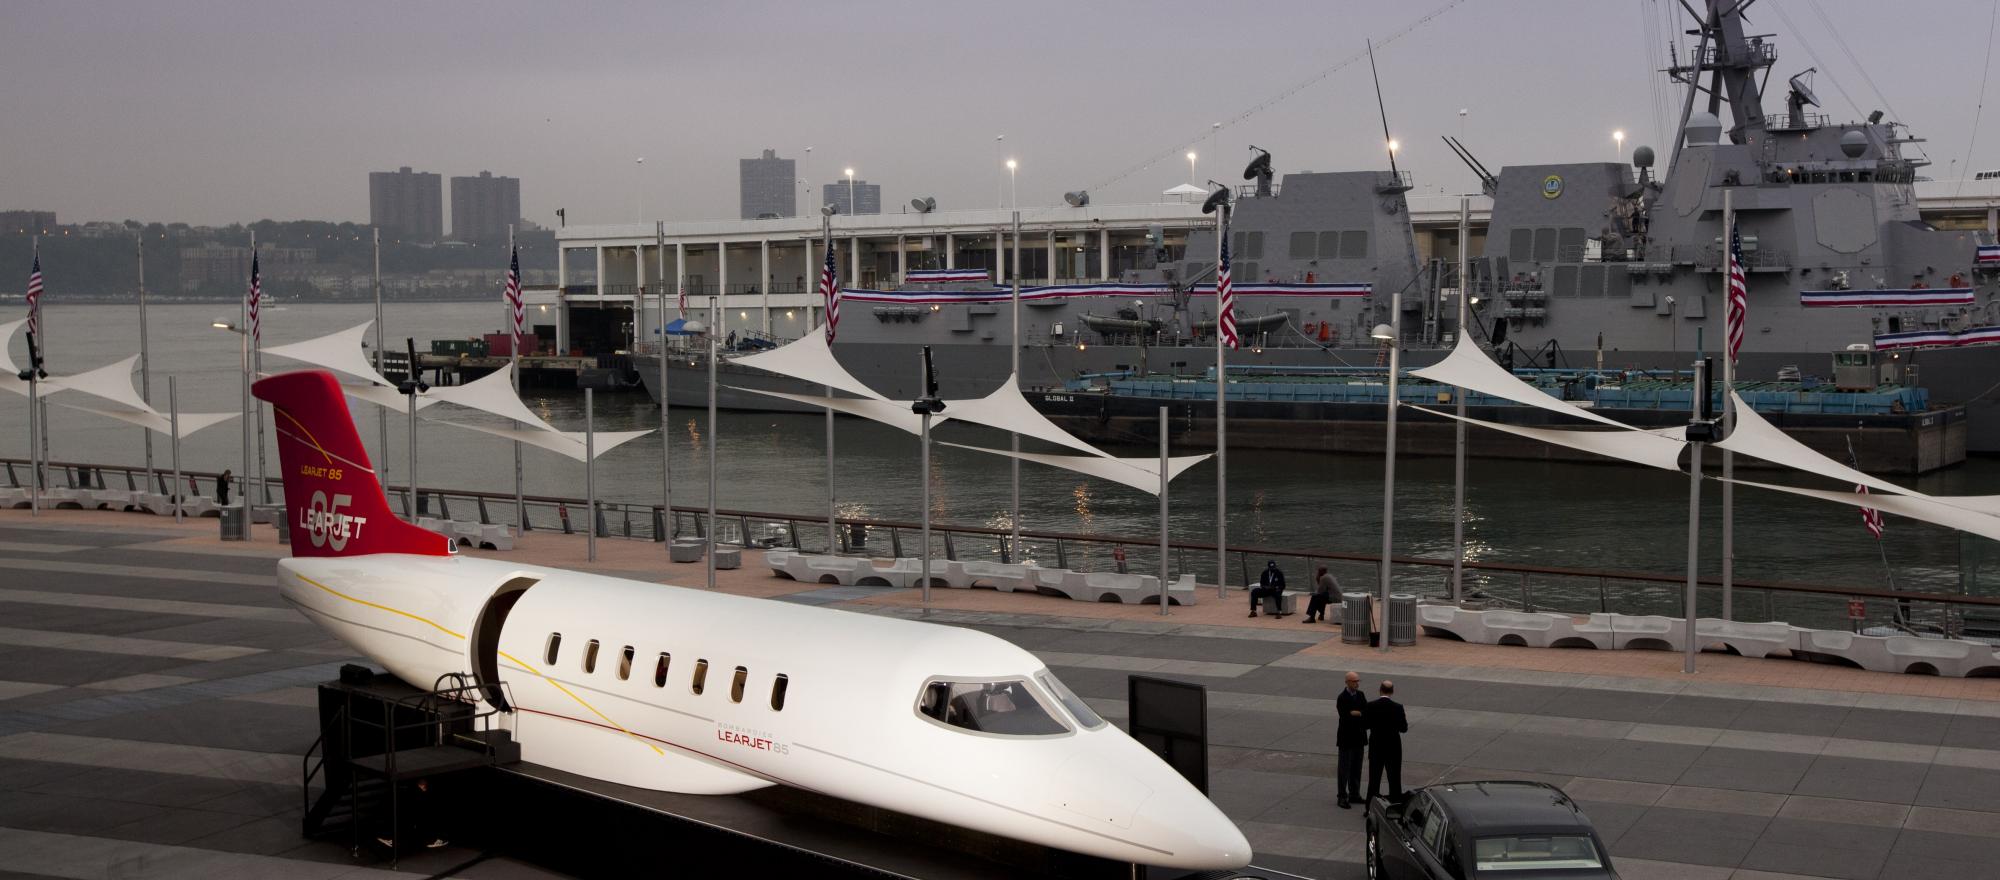 Learjet 85 Unveiled at Intrepid Museum in New York City Photo Credit:  Jason Tinacci